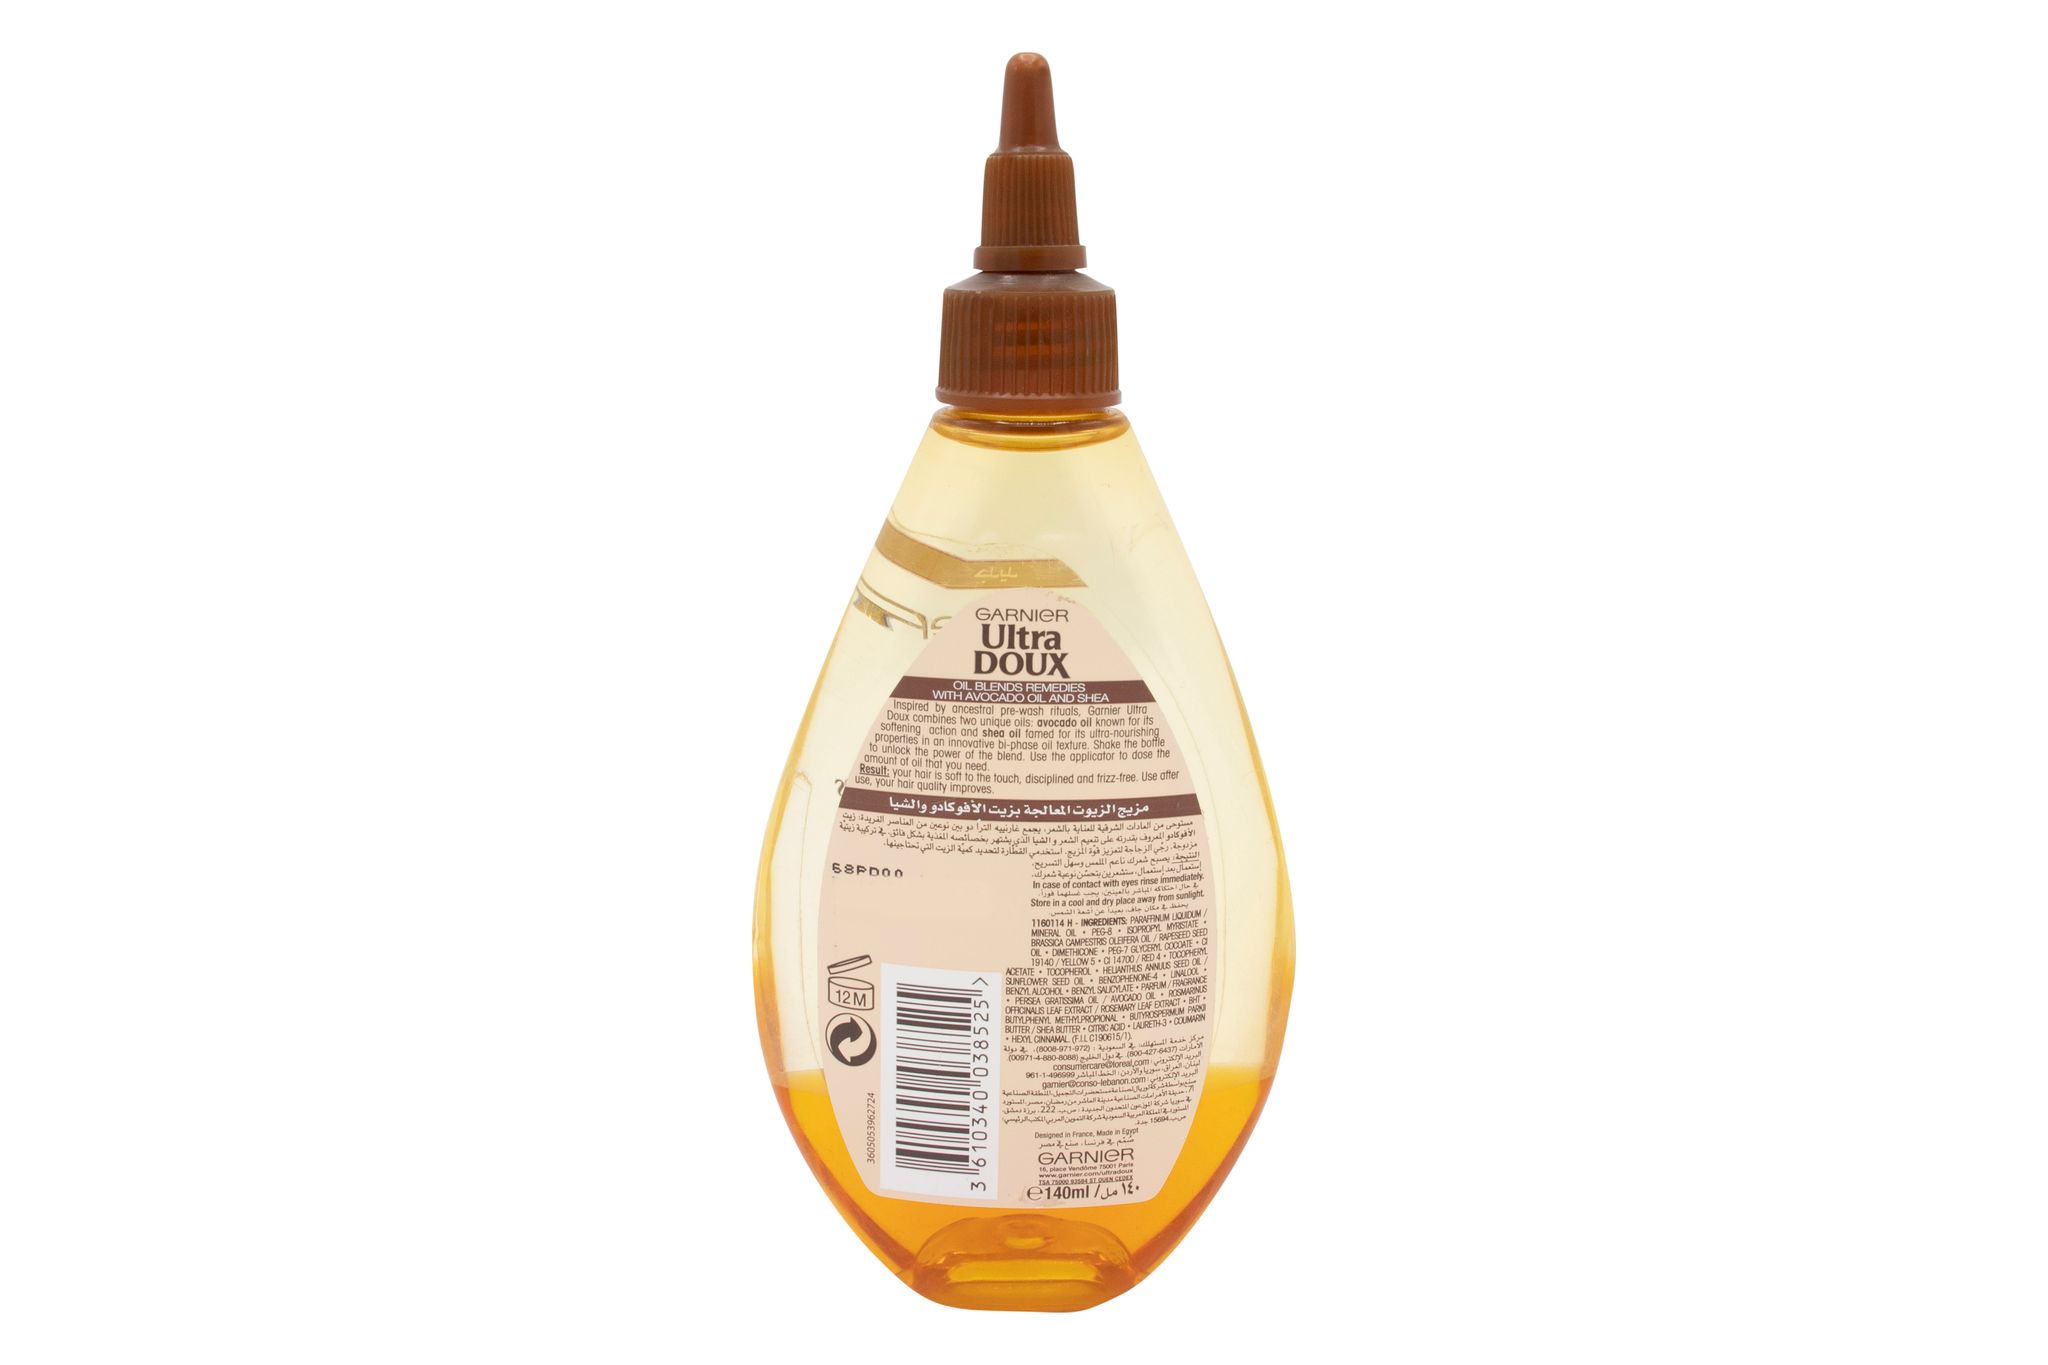 Ultra Doux Oil Blends Remedies Avocado Oil and Shea